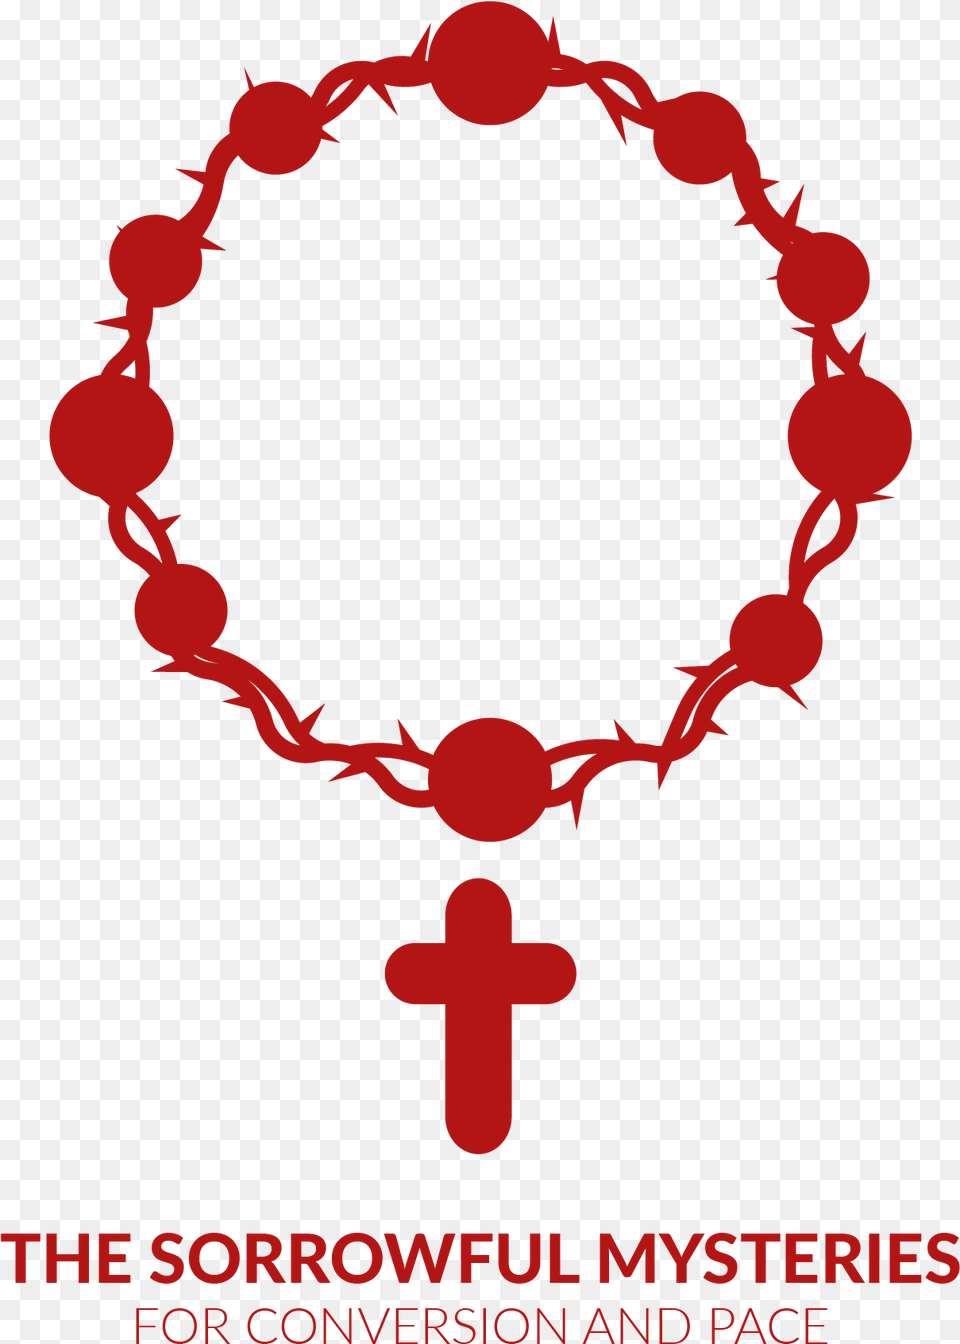 The Sorrowful Mysteries For Conversion And Peace Sorrowful Mysteries Of The Rosary Symbols, Accessories, Cross, Symbol, Jewelry Free Transparent Png